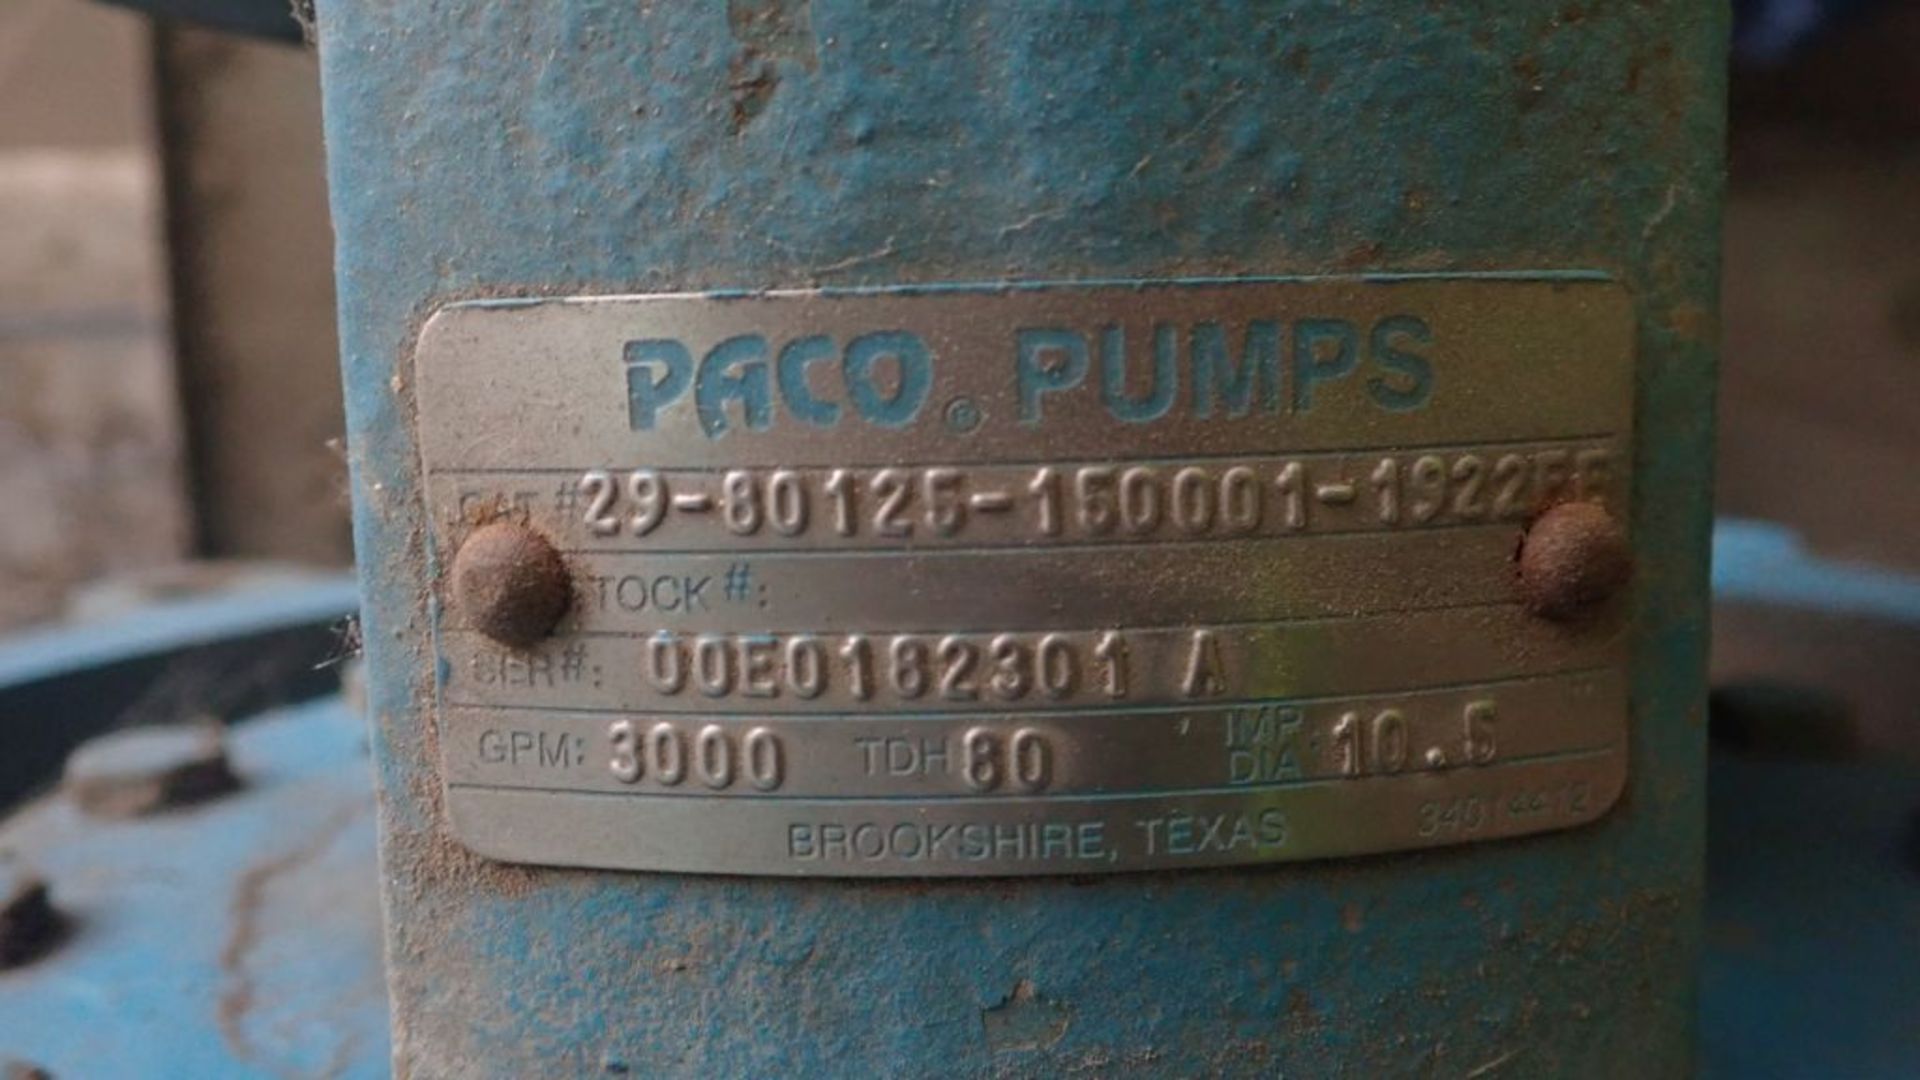 Paco Pump | Cat No. 29-80125-150001-1922EE; 230/460V; 3000 GPM; Tag: 231719 - Image 6 of 6